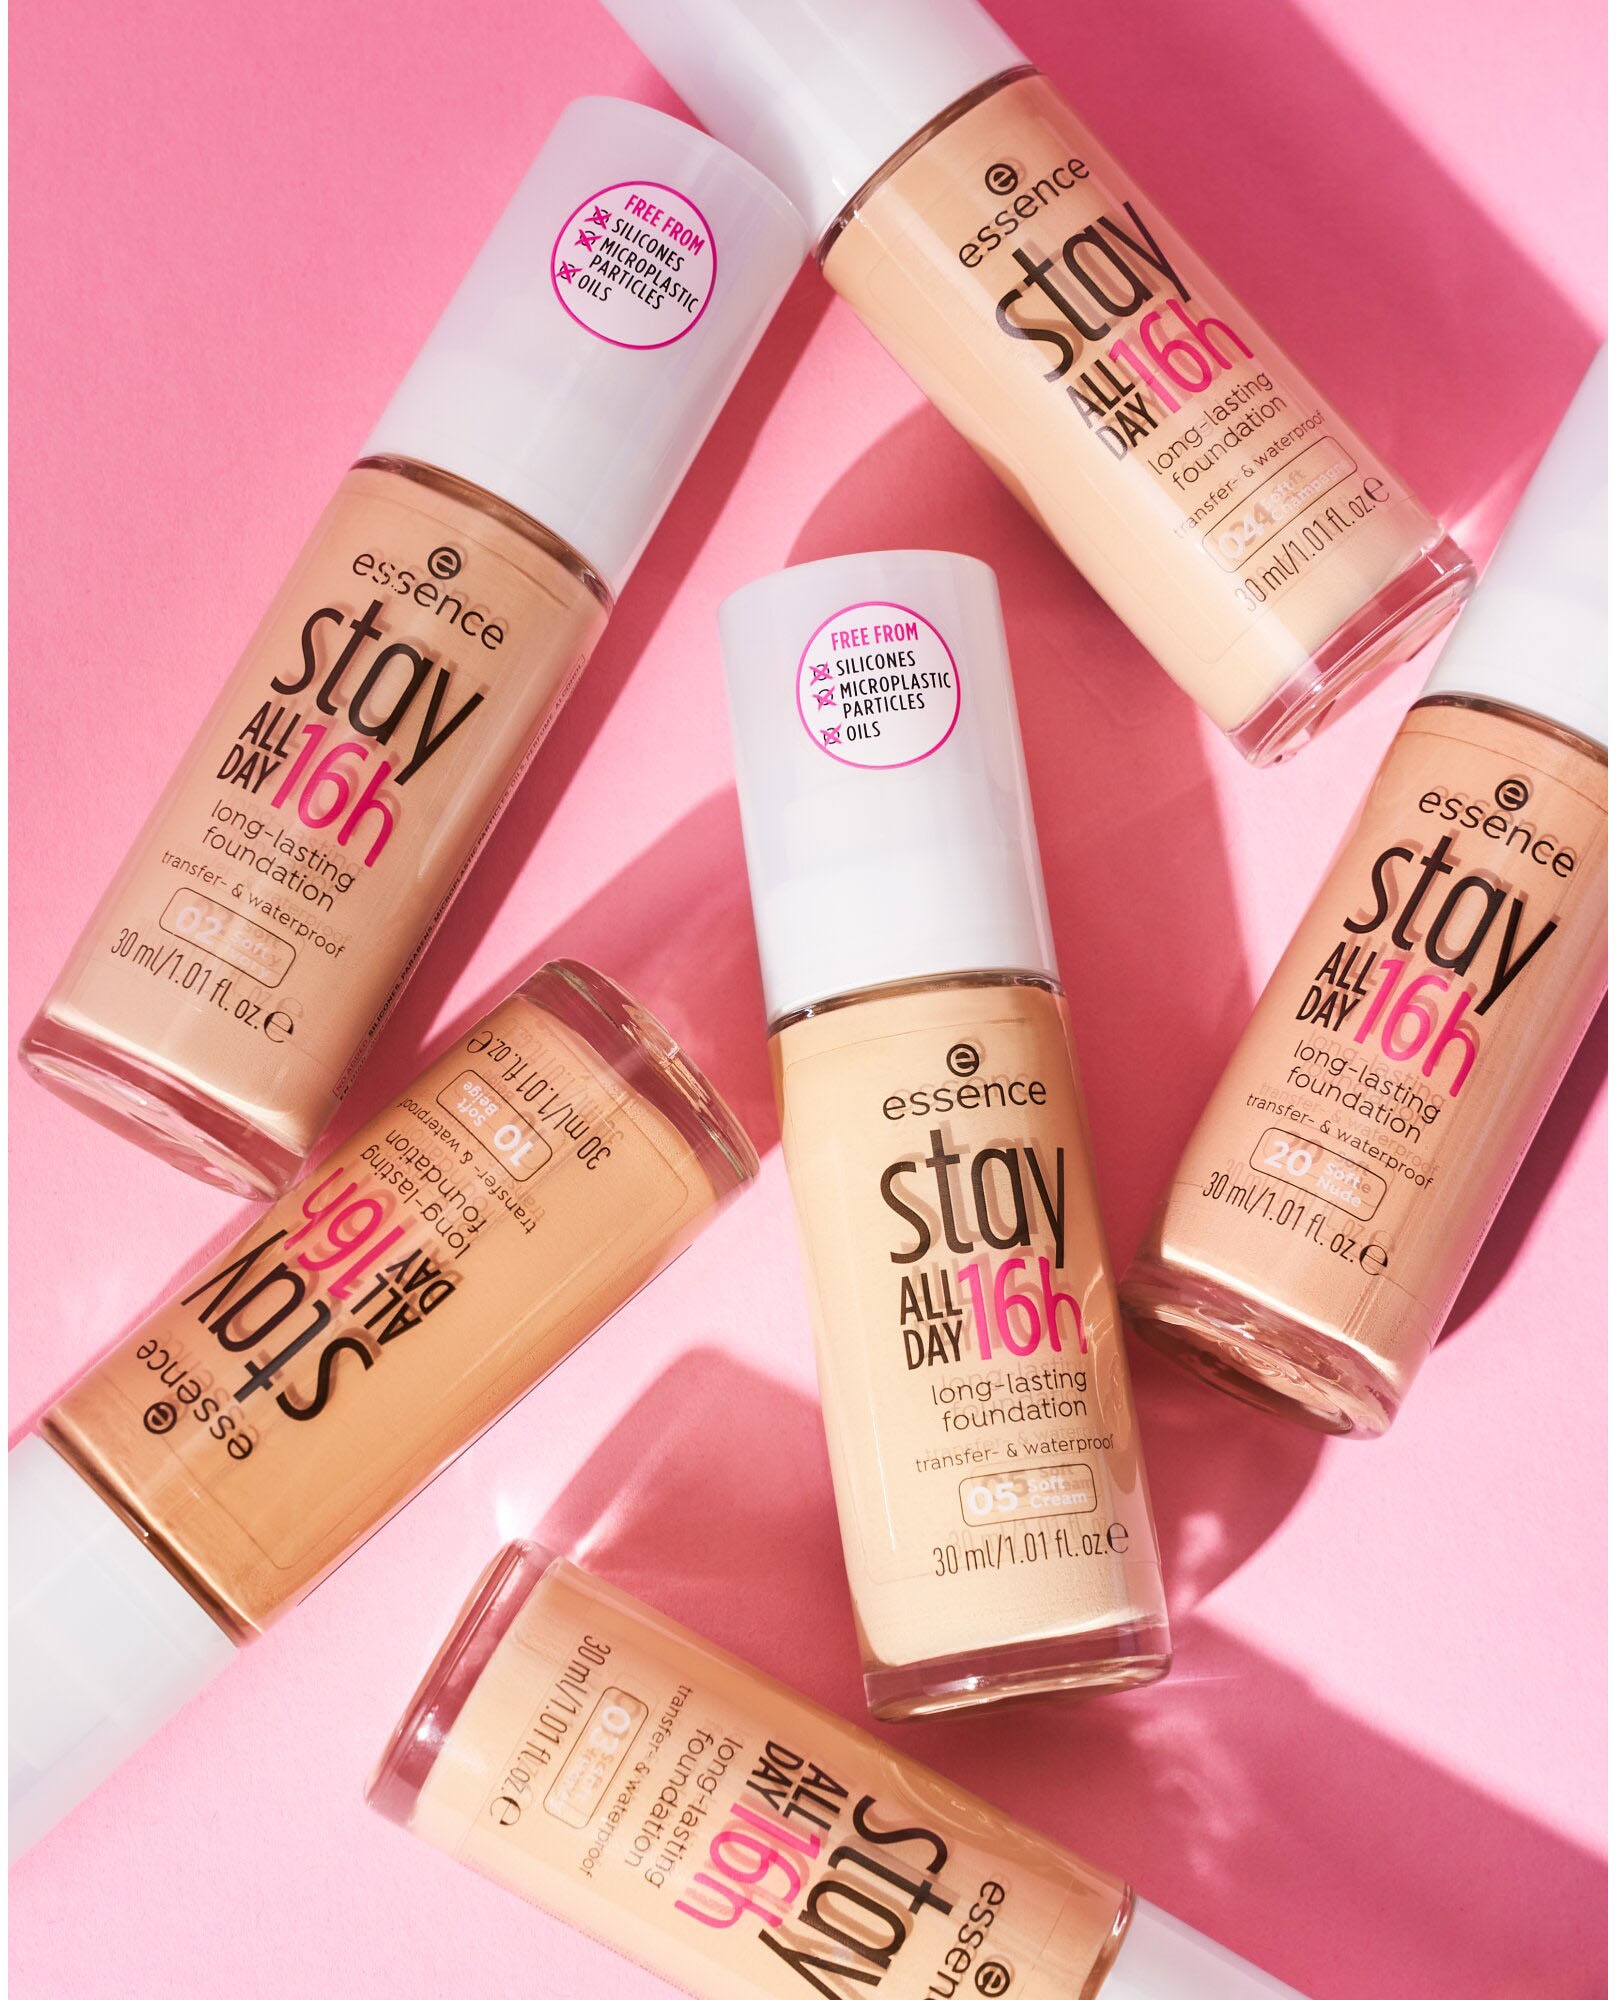 tlg.) bei ALL Essence Foundation long-lasting«, 3 »stay ♕ 16h DAY (Set,